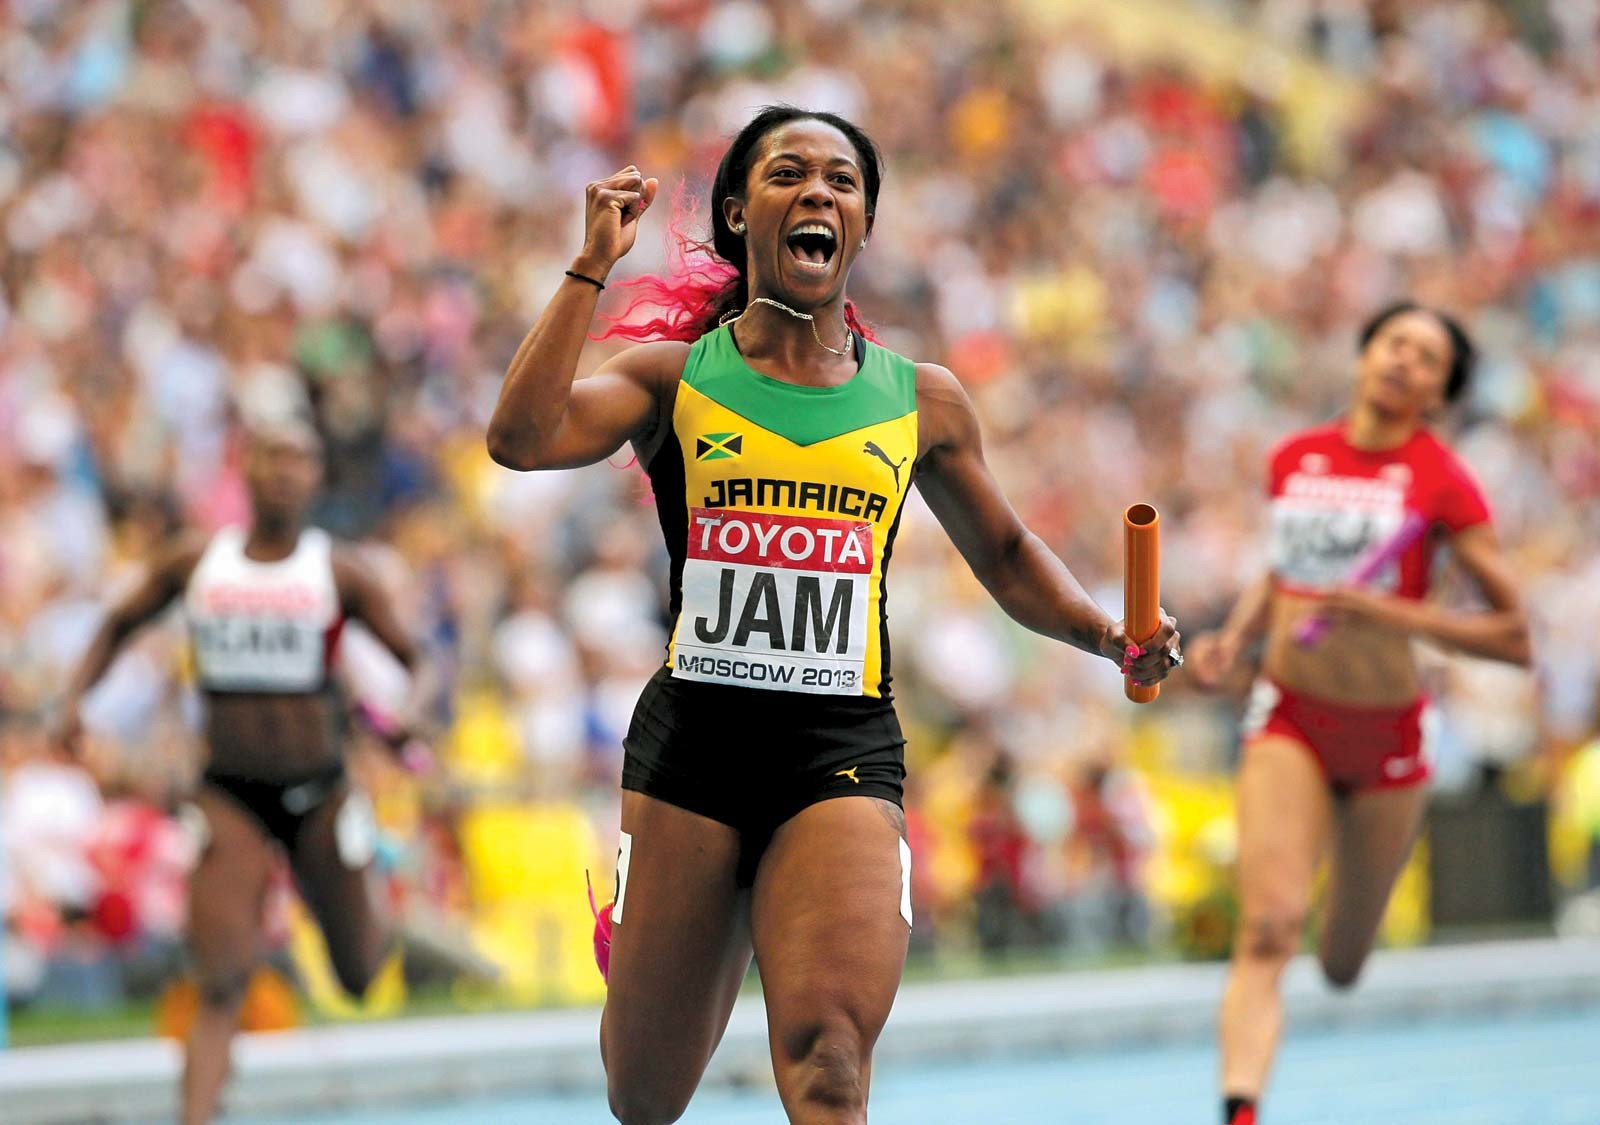 Four-time 100m world champion Shelly-Ann Fraser-Pryce says she believes she can keep the younger generation at bay to win Olympic gold in Tokyo